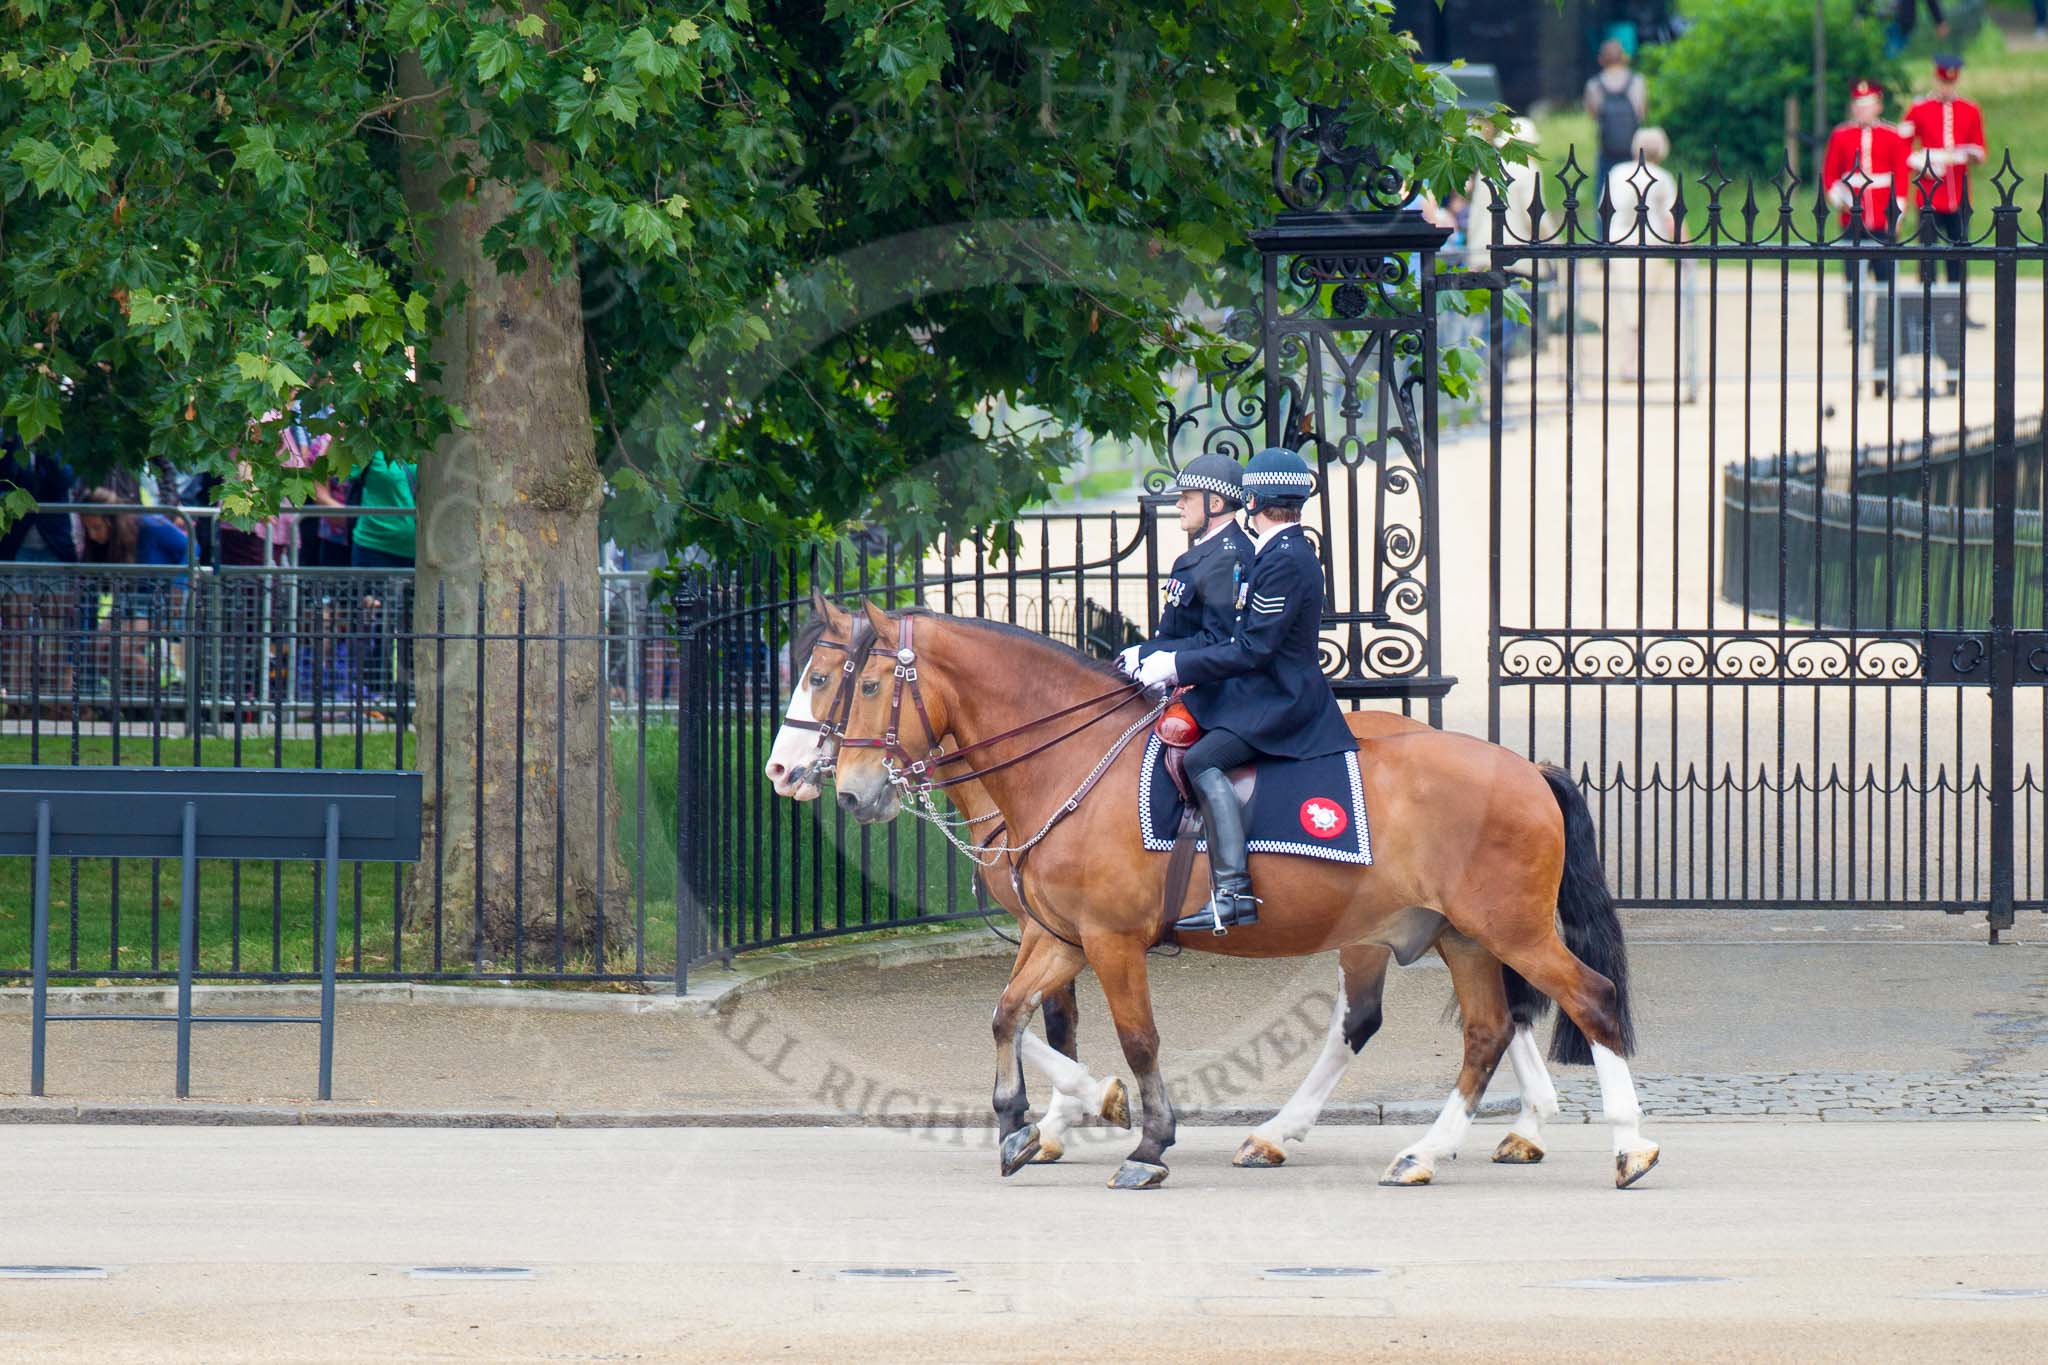 Trooping the Colour 2014.
Horse Guards Parade, Westminster,
London SW1A,

United Kingdom,
on 14 June 2014 at 09:51, image #56